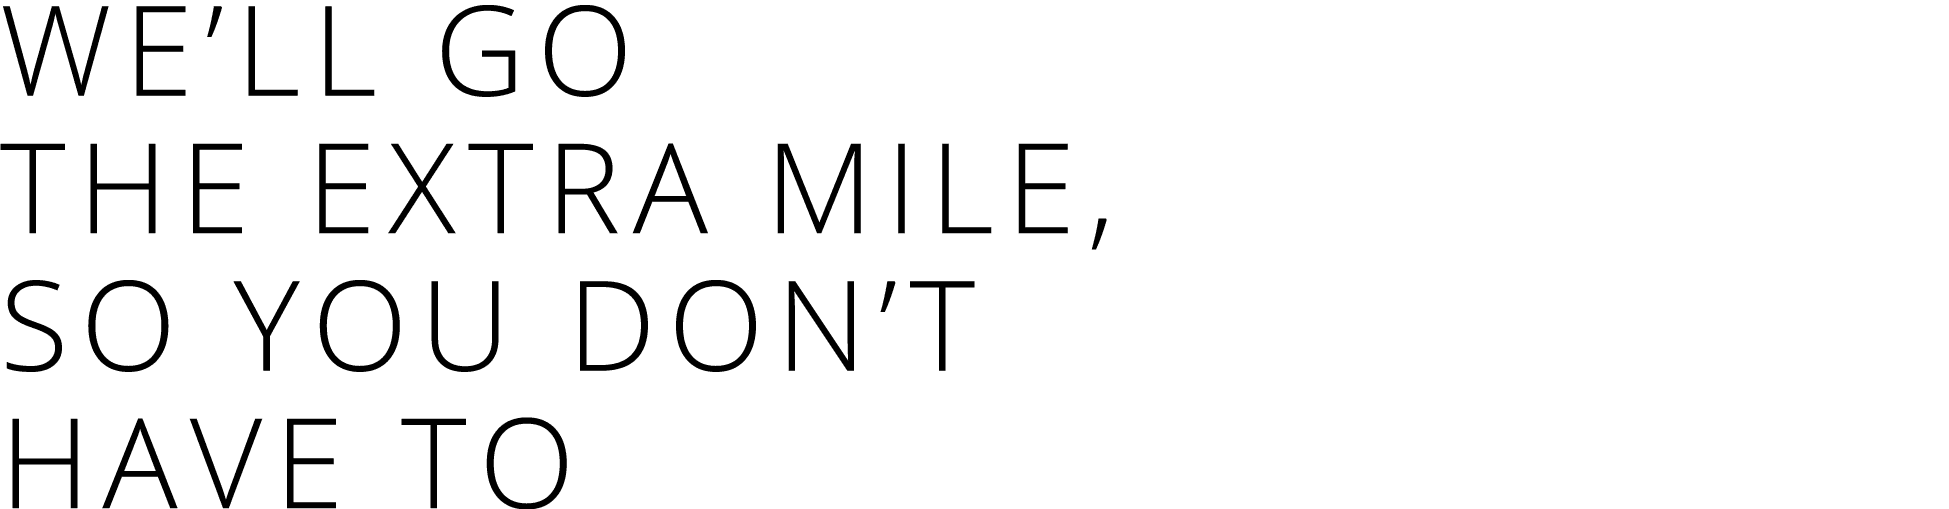 We’ll go the extra mile, so you don’t have to